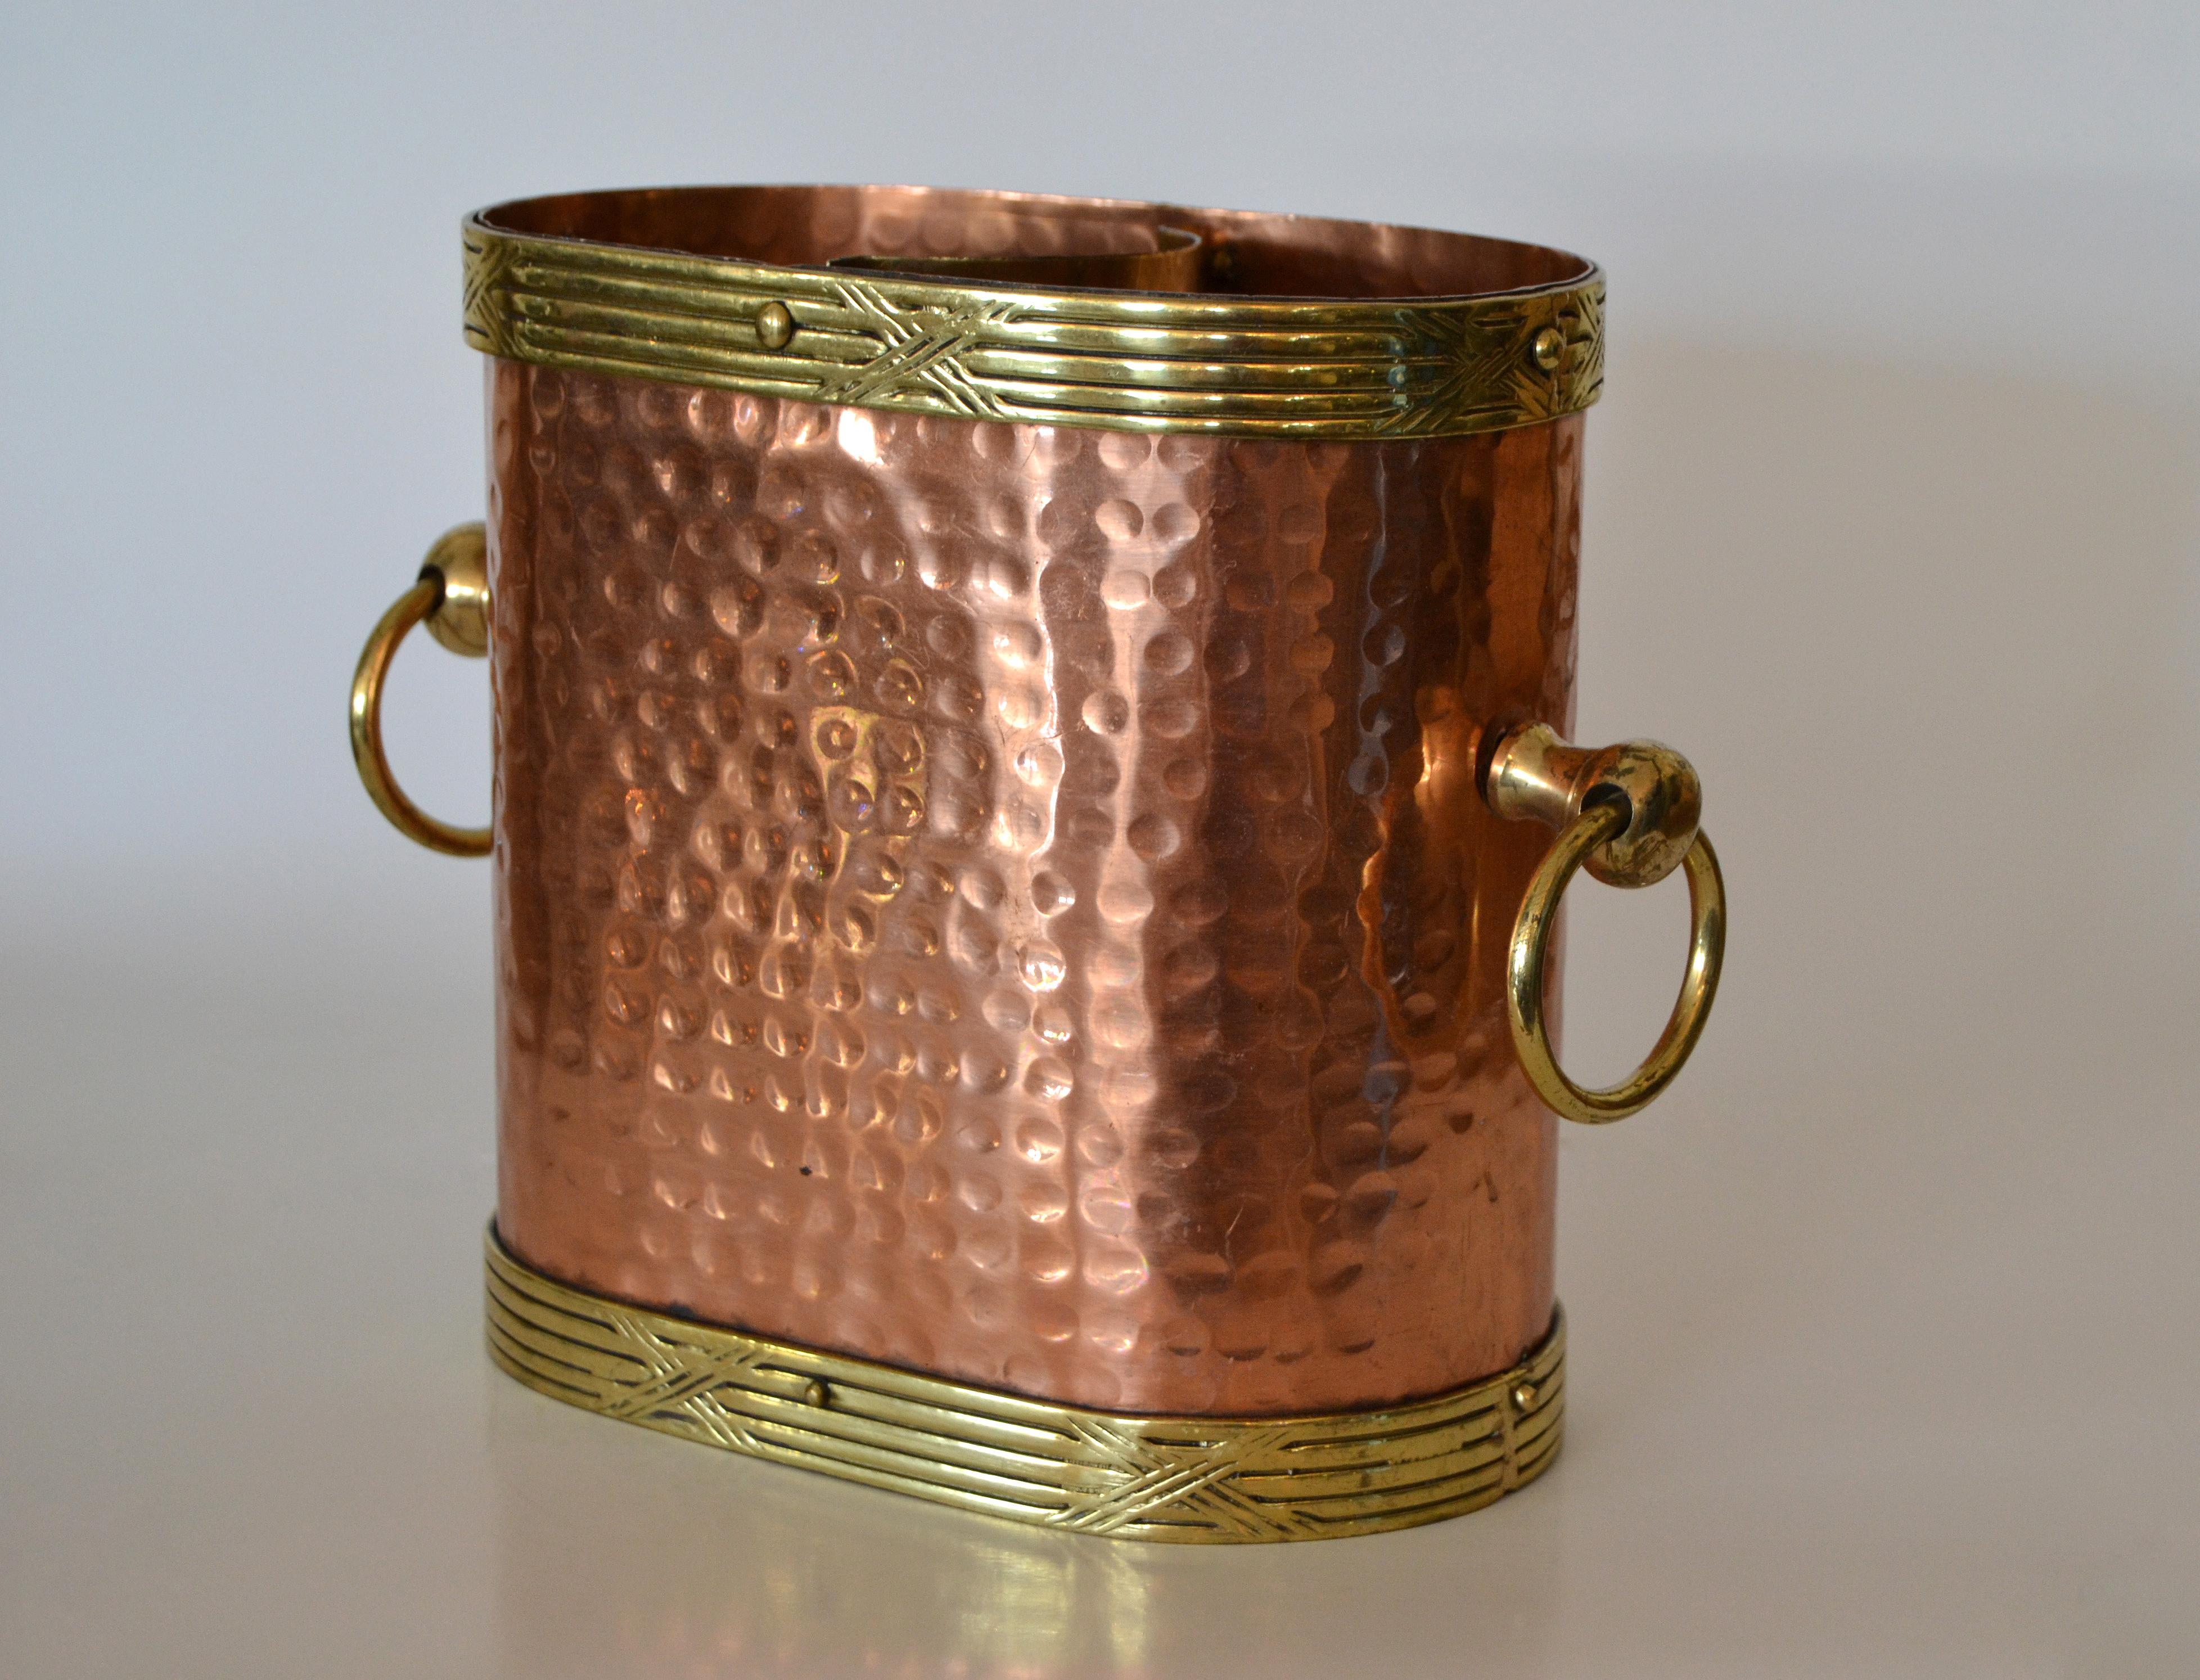 French Art Deco hand-hammered copper, brass and bronze detail Champagne ice bucket or Wine Cooler.
A formfit divider inside the bucket for the single Champagne bottle.
Heavy and great quality craftsmanship.
Perfect also as a wine cooler for Your